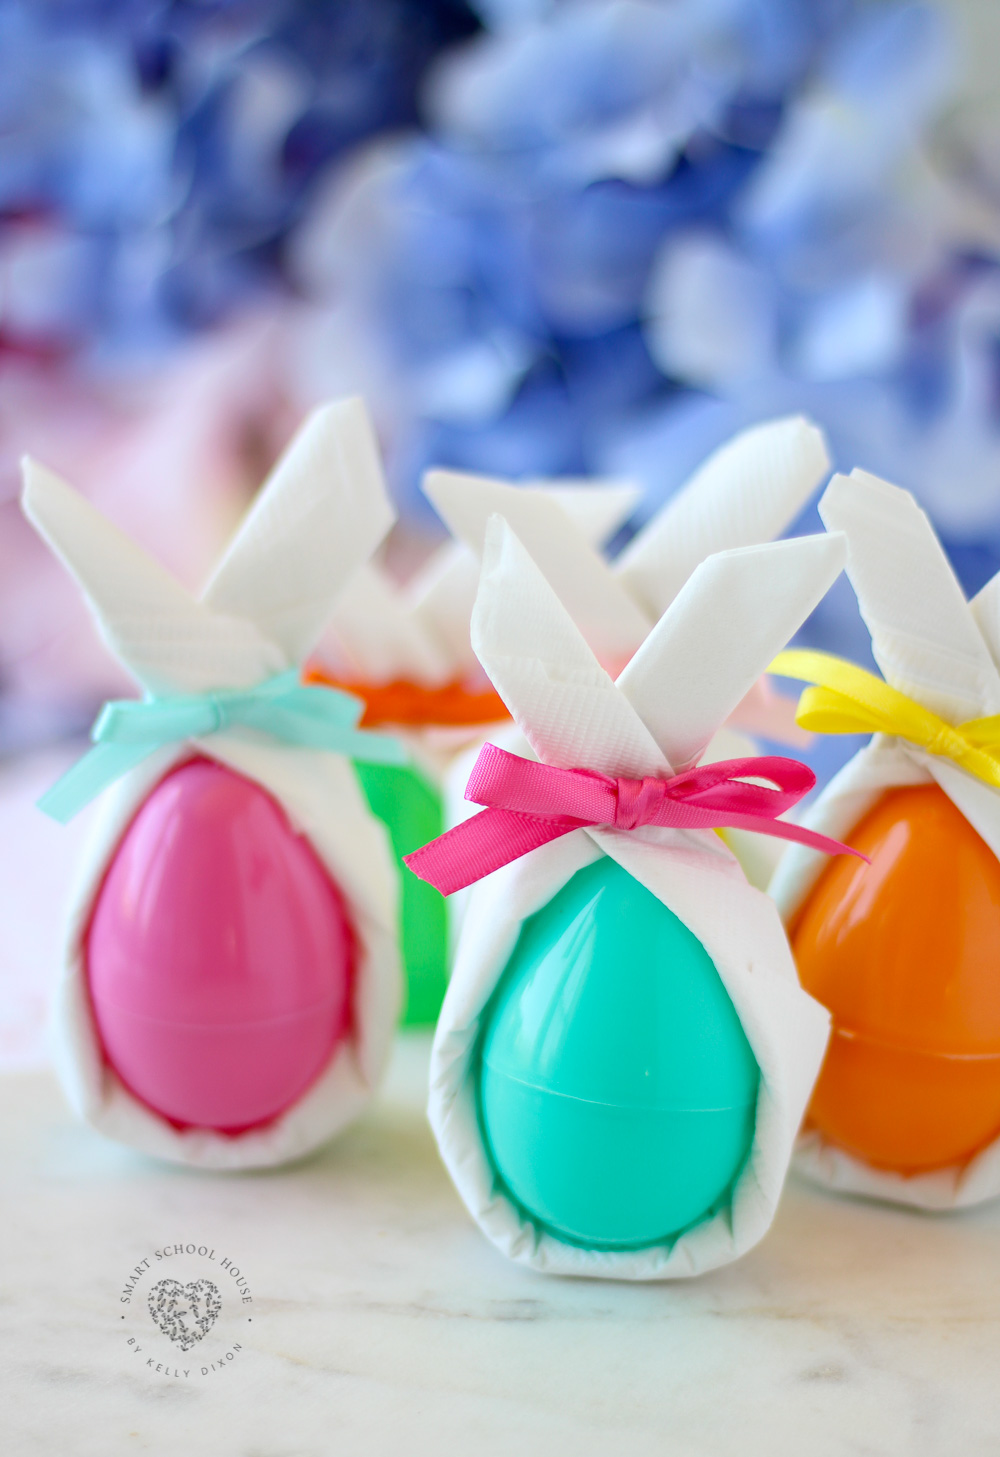 Give your plastic Easter eggs a “Wow” factor with these easy DIY bunny ear napkins! #Easter #EasterEggs #DecoratingEasterEggs #DIYEasterDecor #EasterCraft